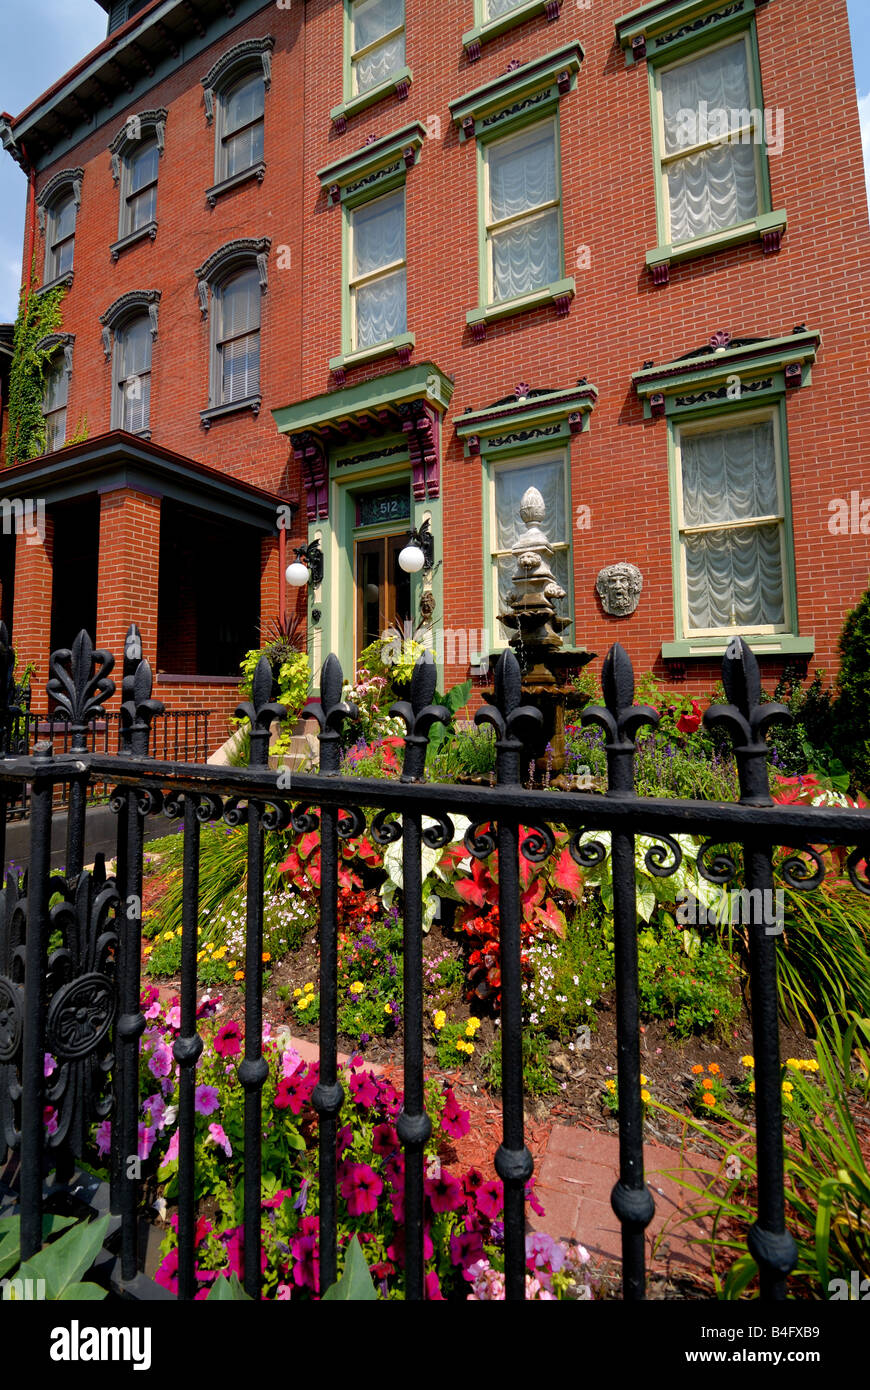 This historic Victorian home can be seen in Pittsburgh Pennsylvania's Mexican War Streets neighborhood. Stock Photo